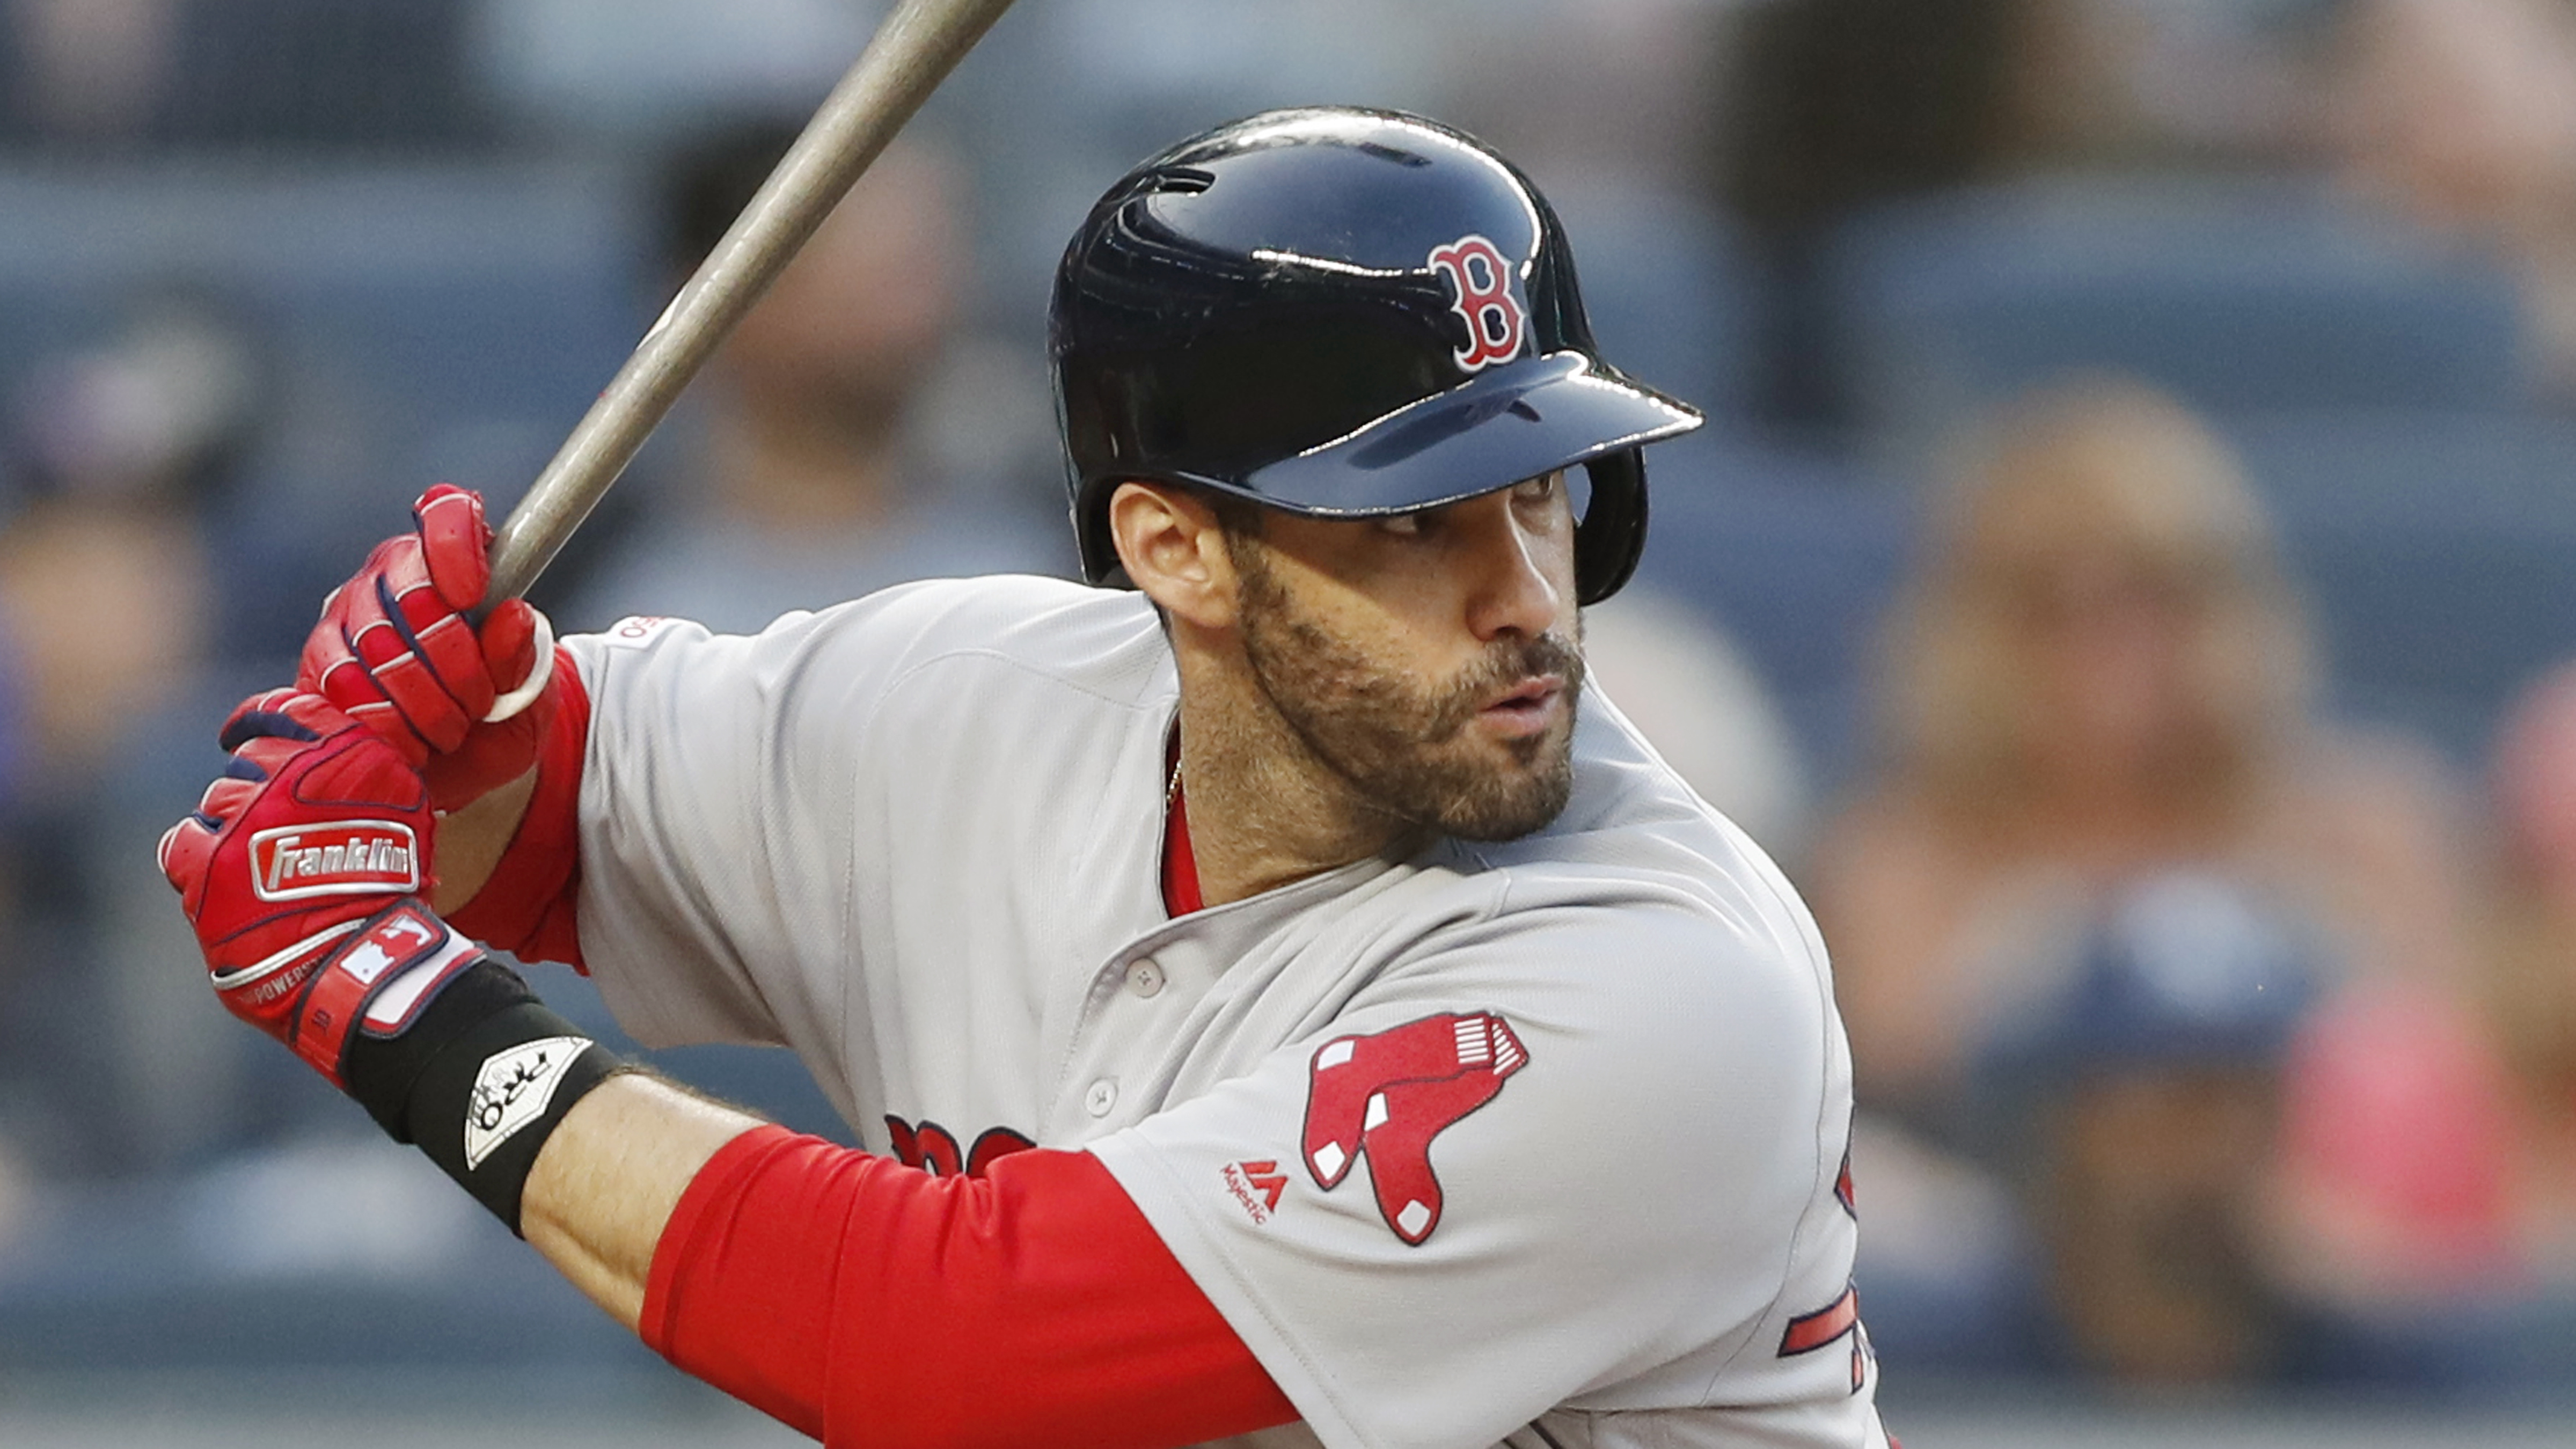 Red Sox notes: Rest was worth it for red-hot J.D. Martinez